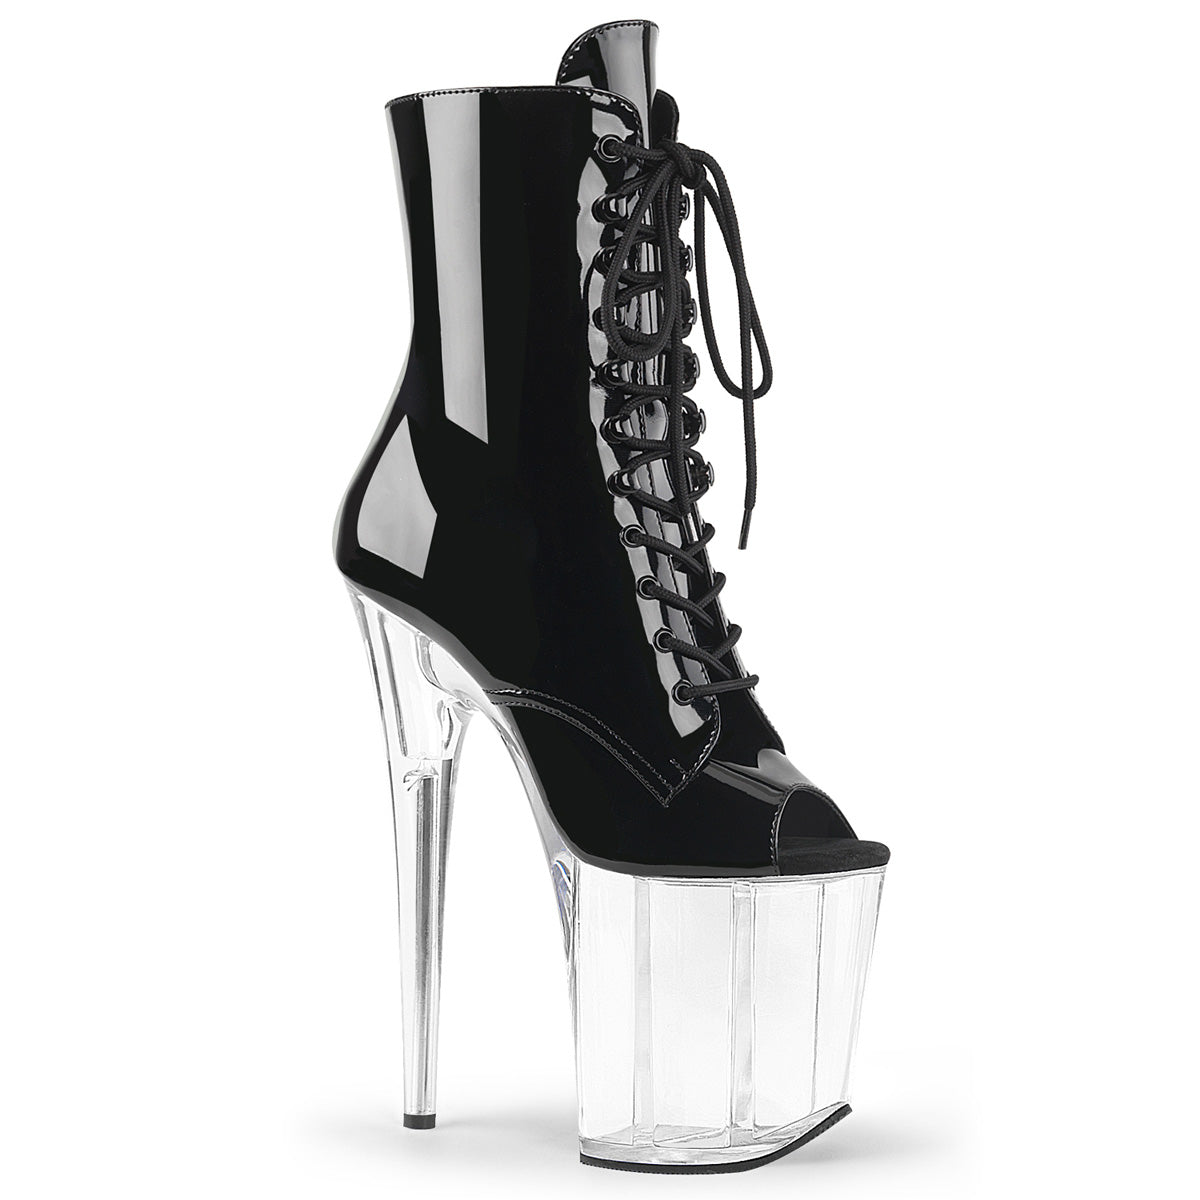 FLAMINGO-1021 8" Heel Black and Clear Pole Dancing Platforms-Pleaser- Sexy Shoes